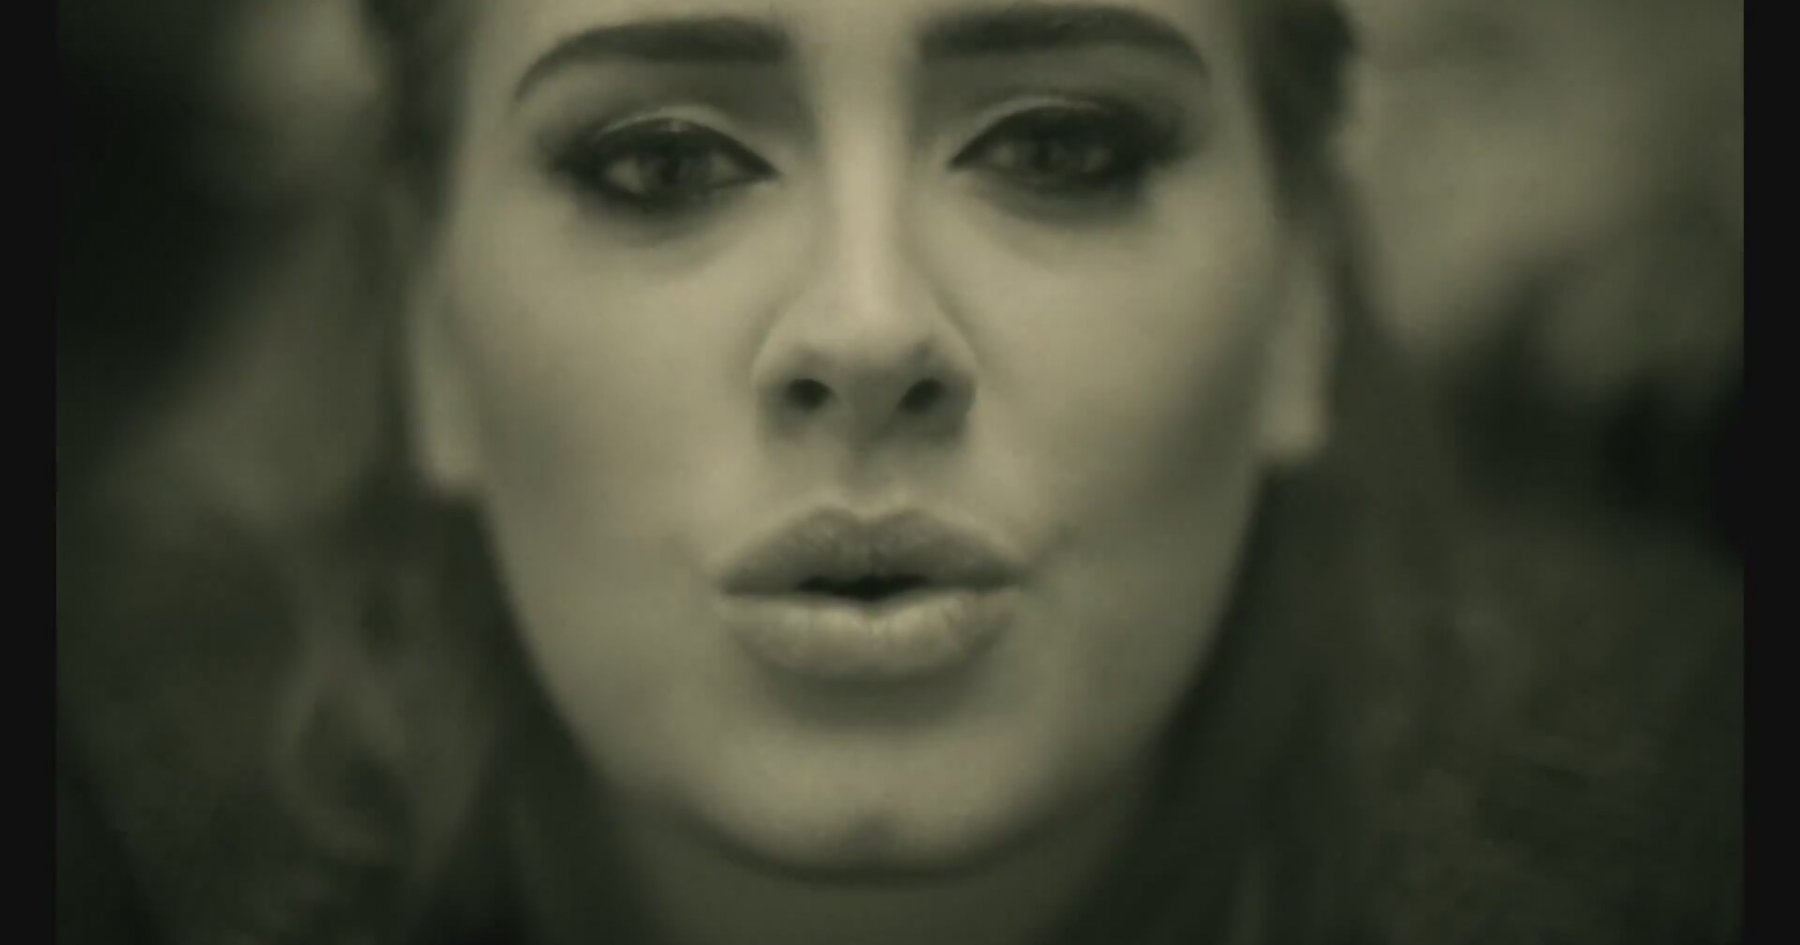 Adele - Hello videos, images and buzz